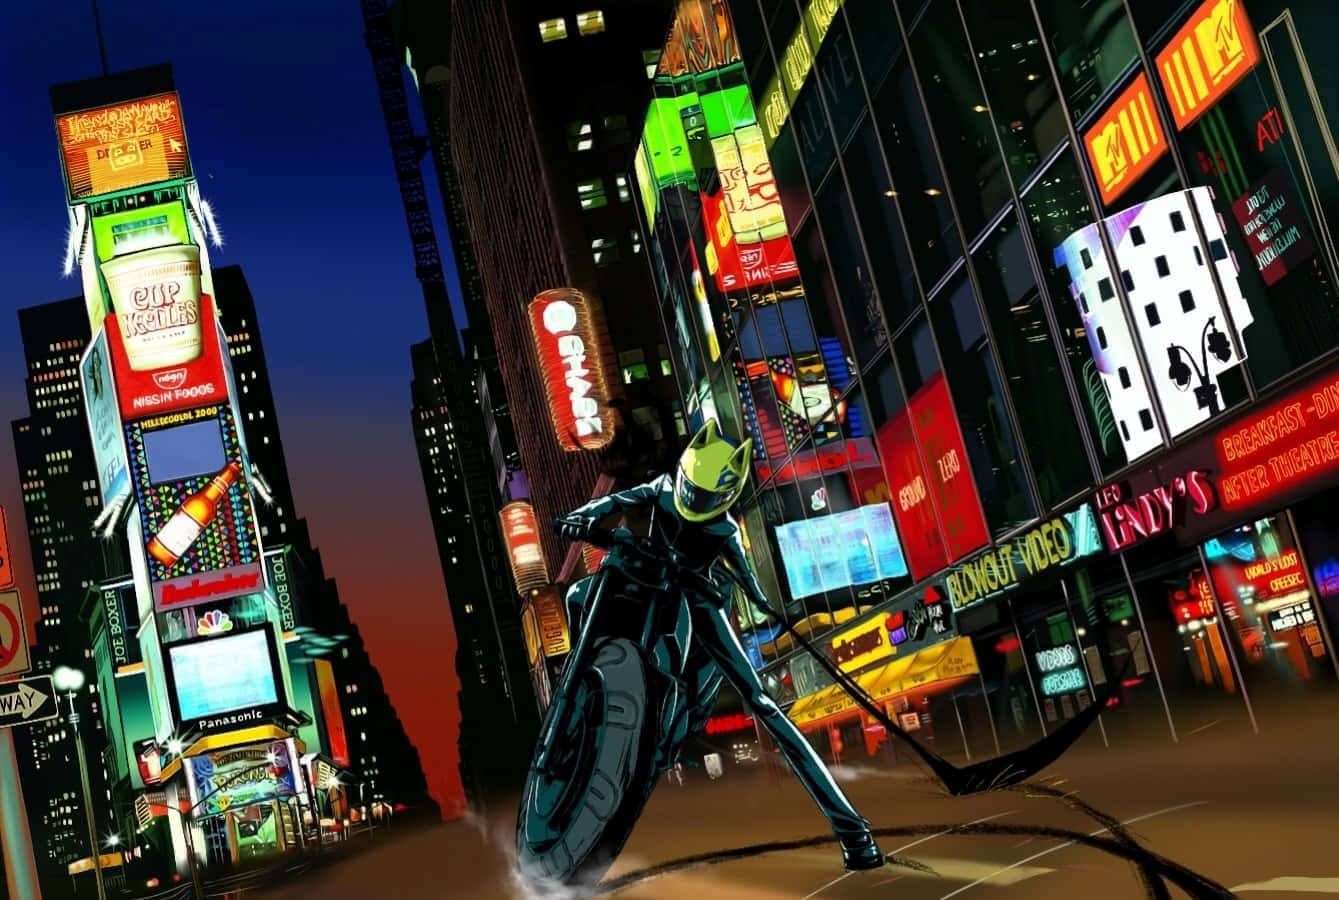 Mysterious and captivating, Celty Sturluson rides through the city on her black motorcycle. Wallpaper